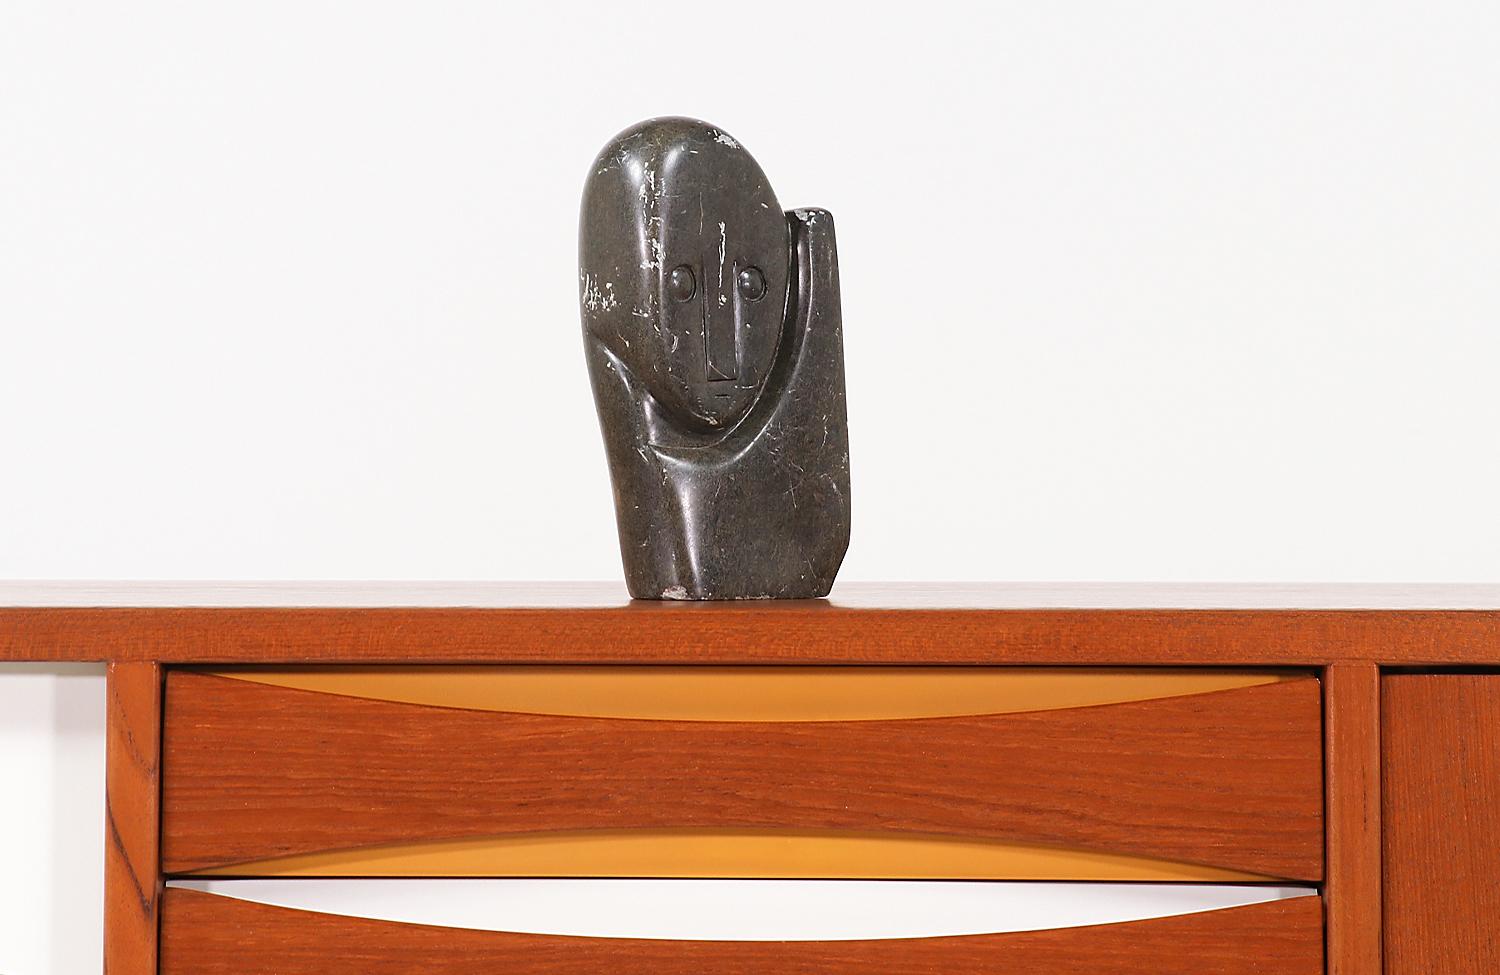 American Mid-Century Modern Cubist Carved Stone Sculpture